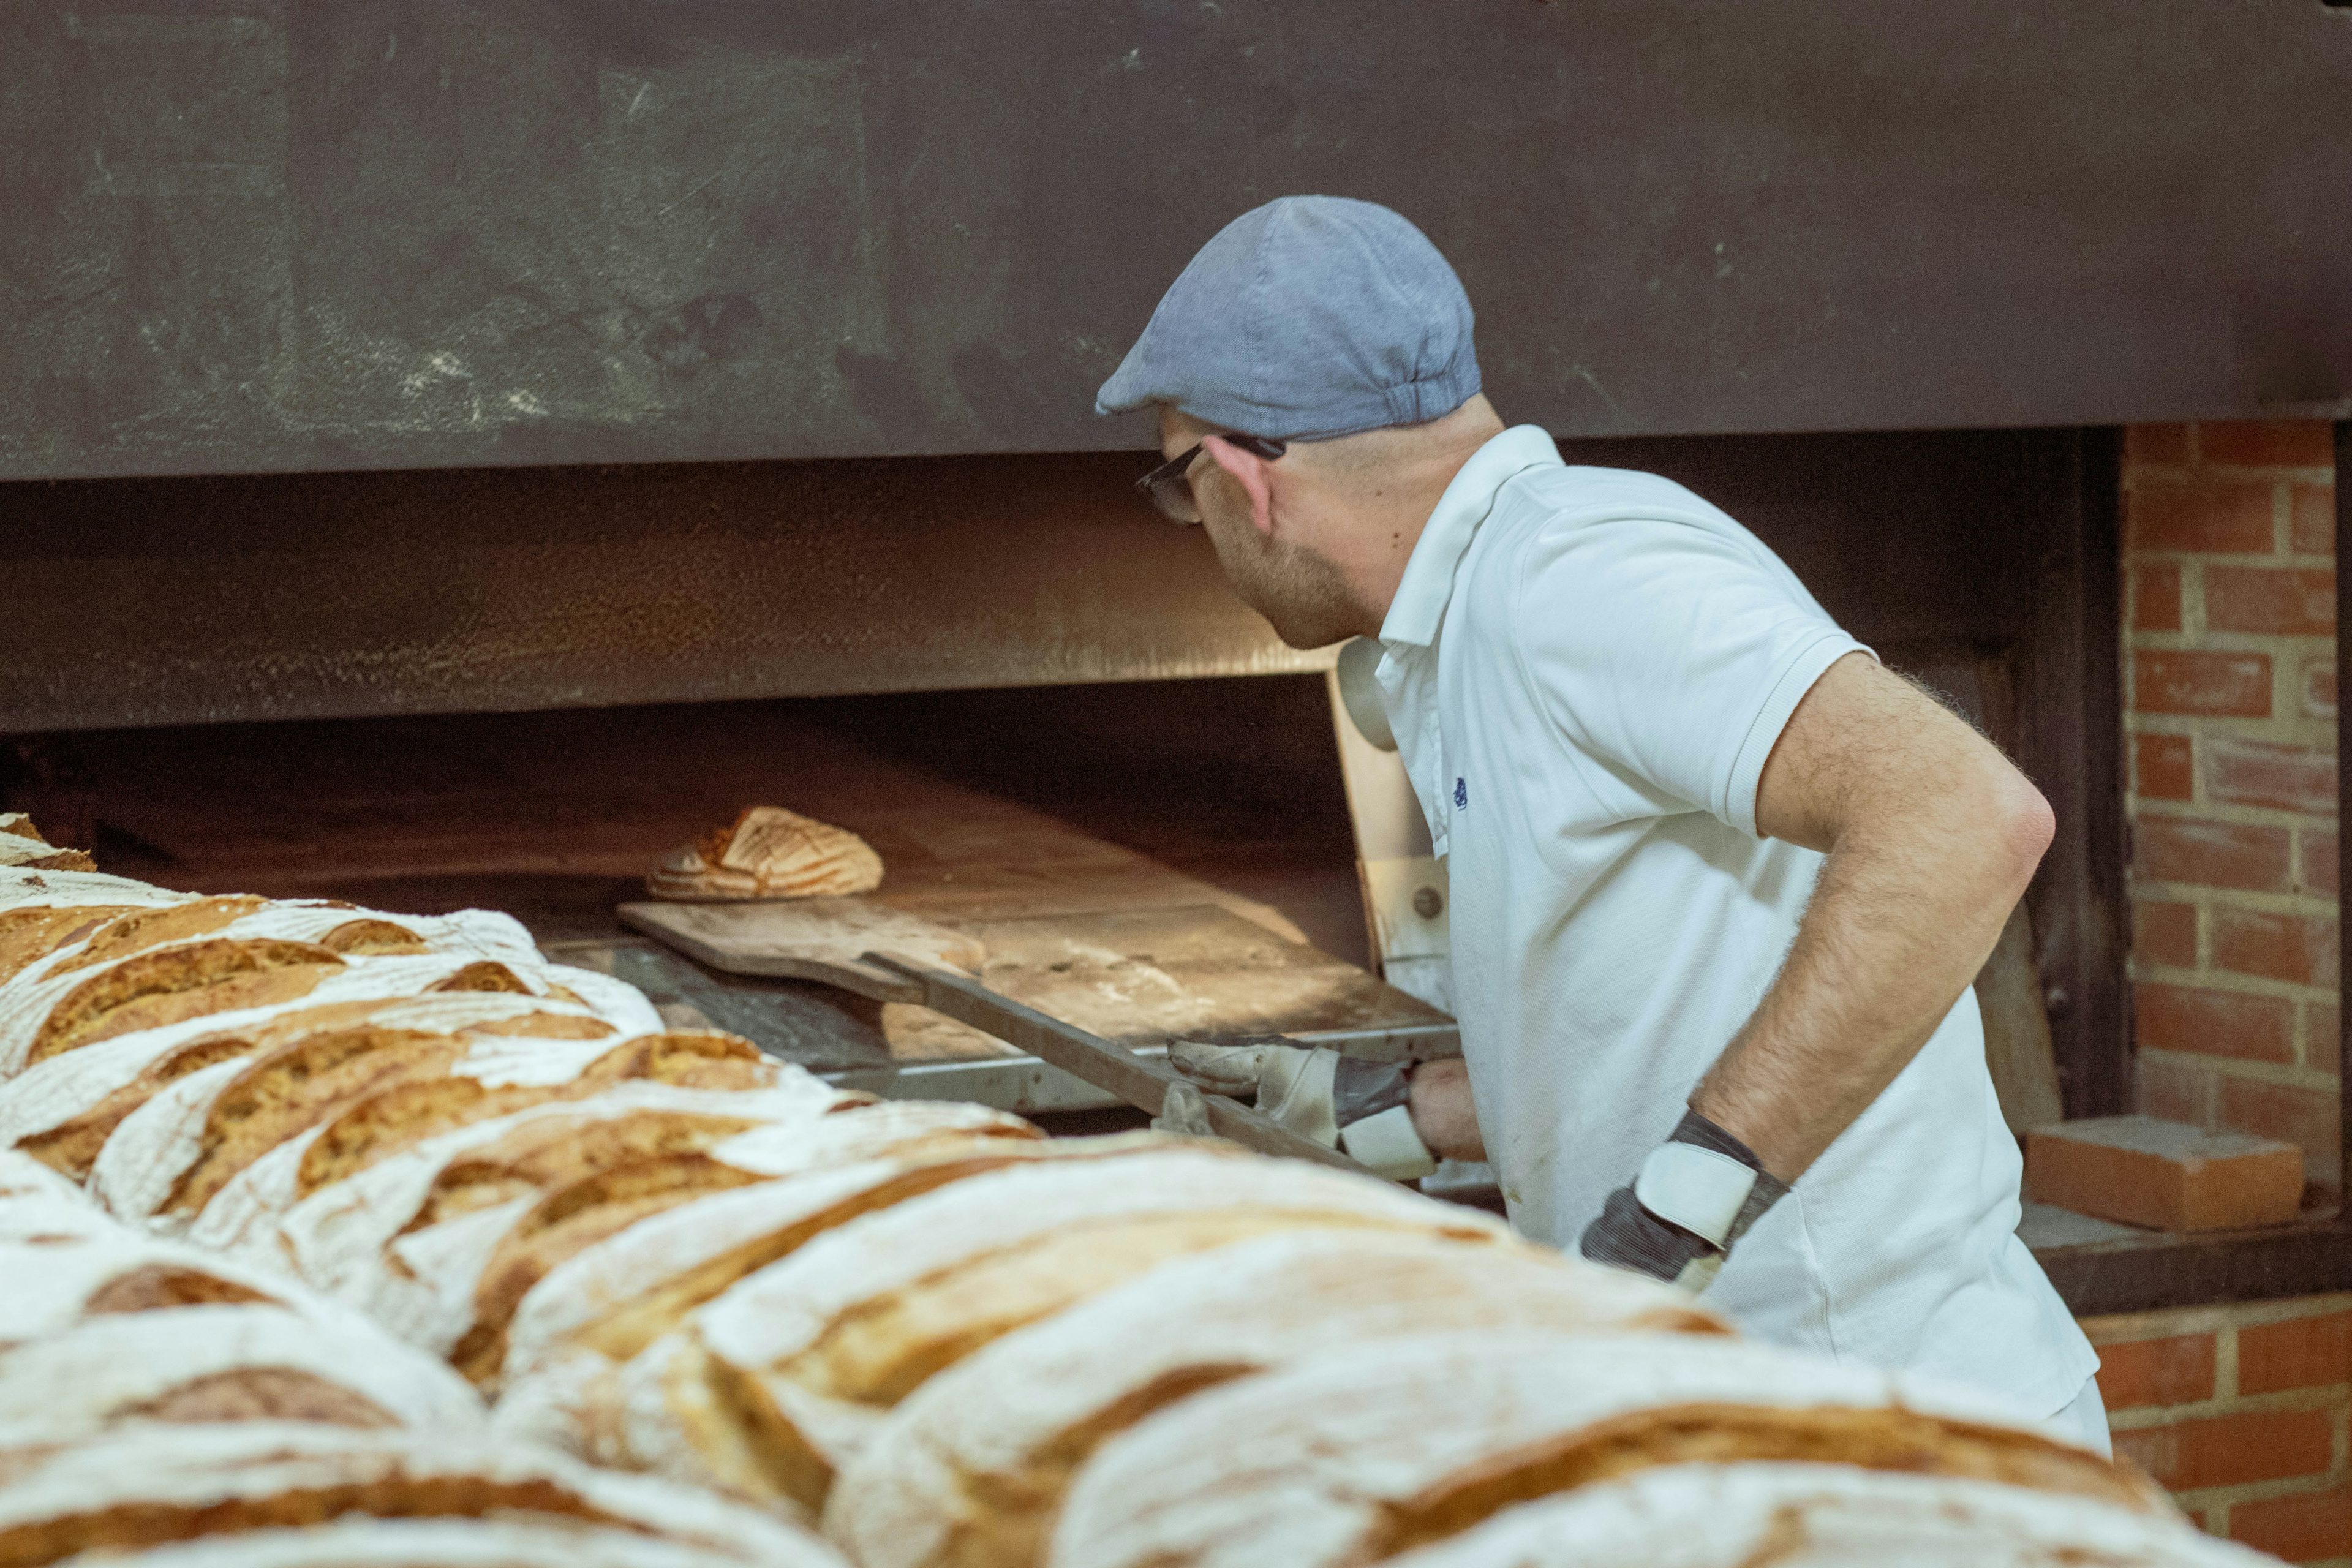 Mimelis - Boulangerie, producer in Commugny canton of Vaud in Switzerland, picture 0